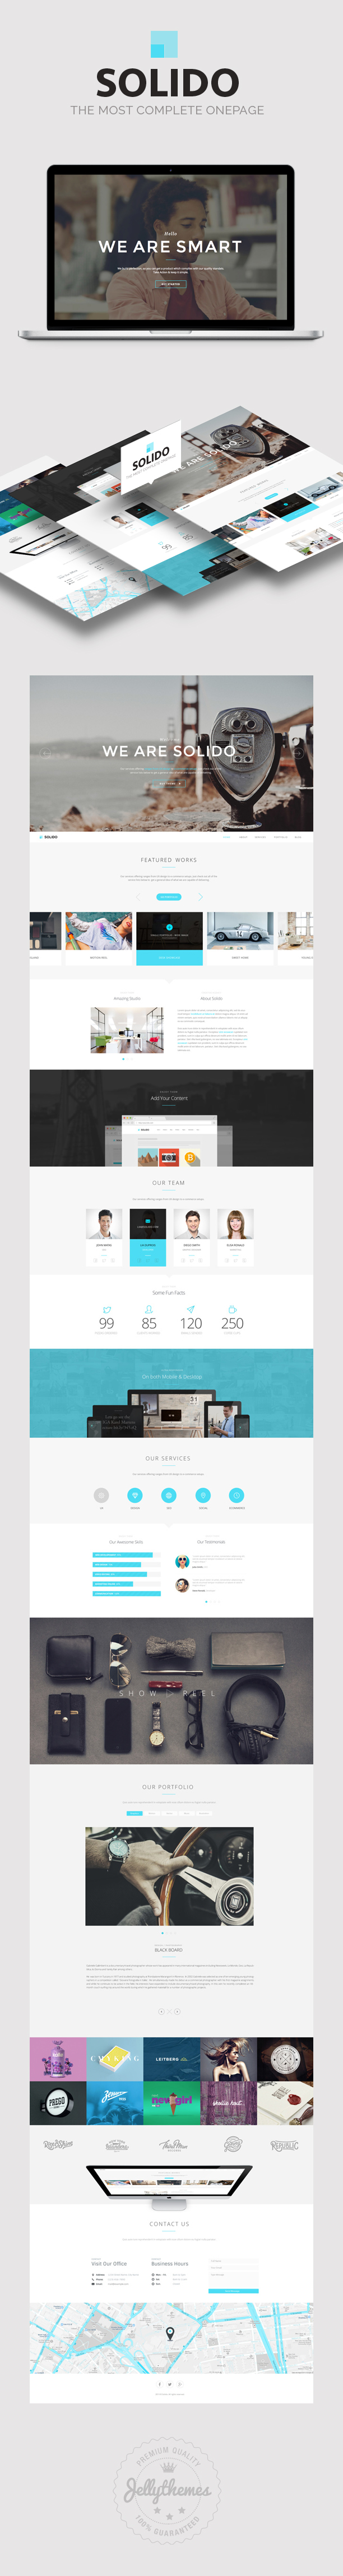 Solido - PSD Template - 2